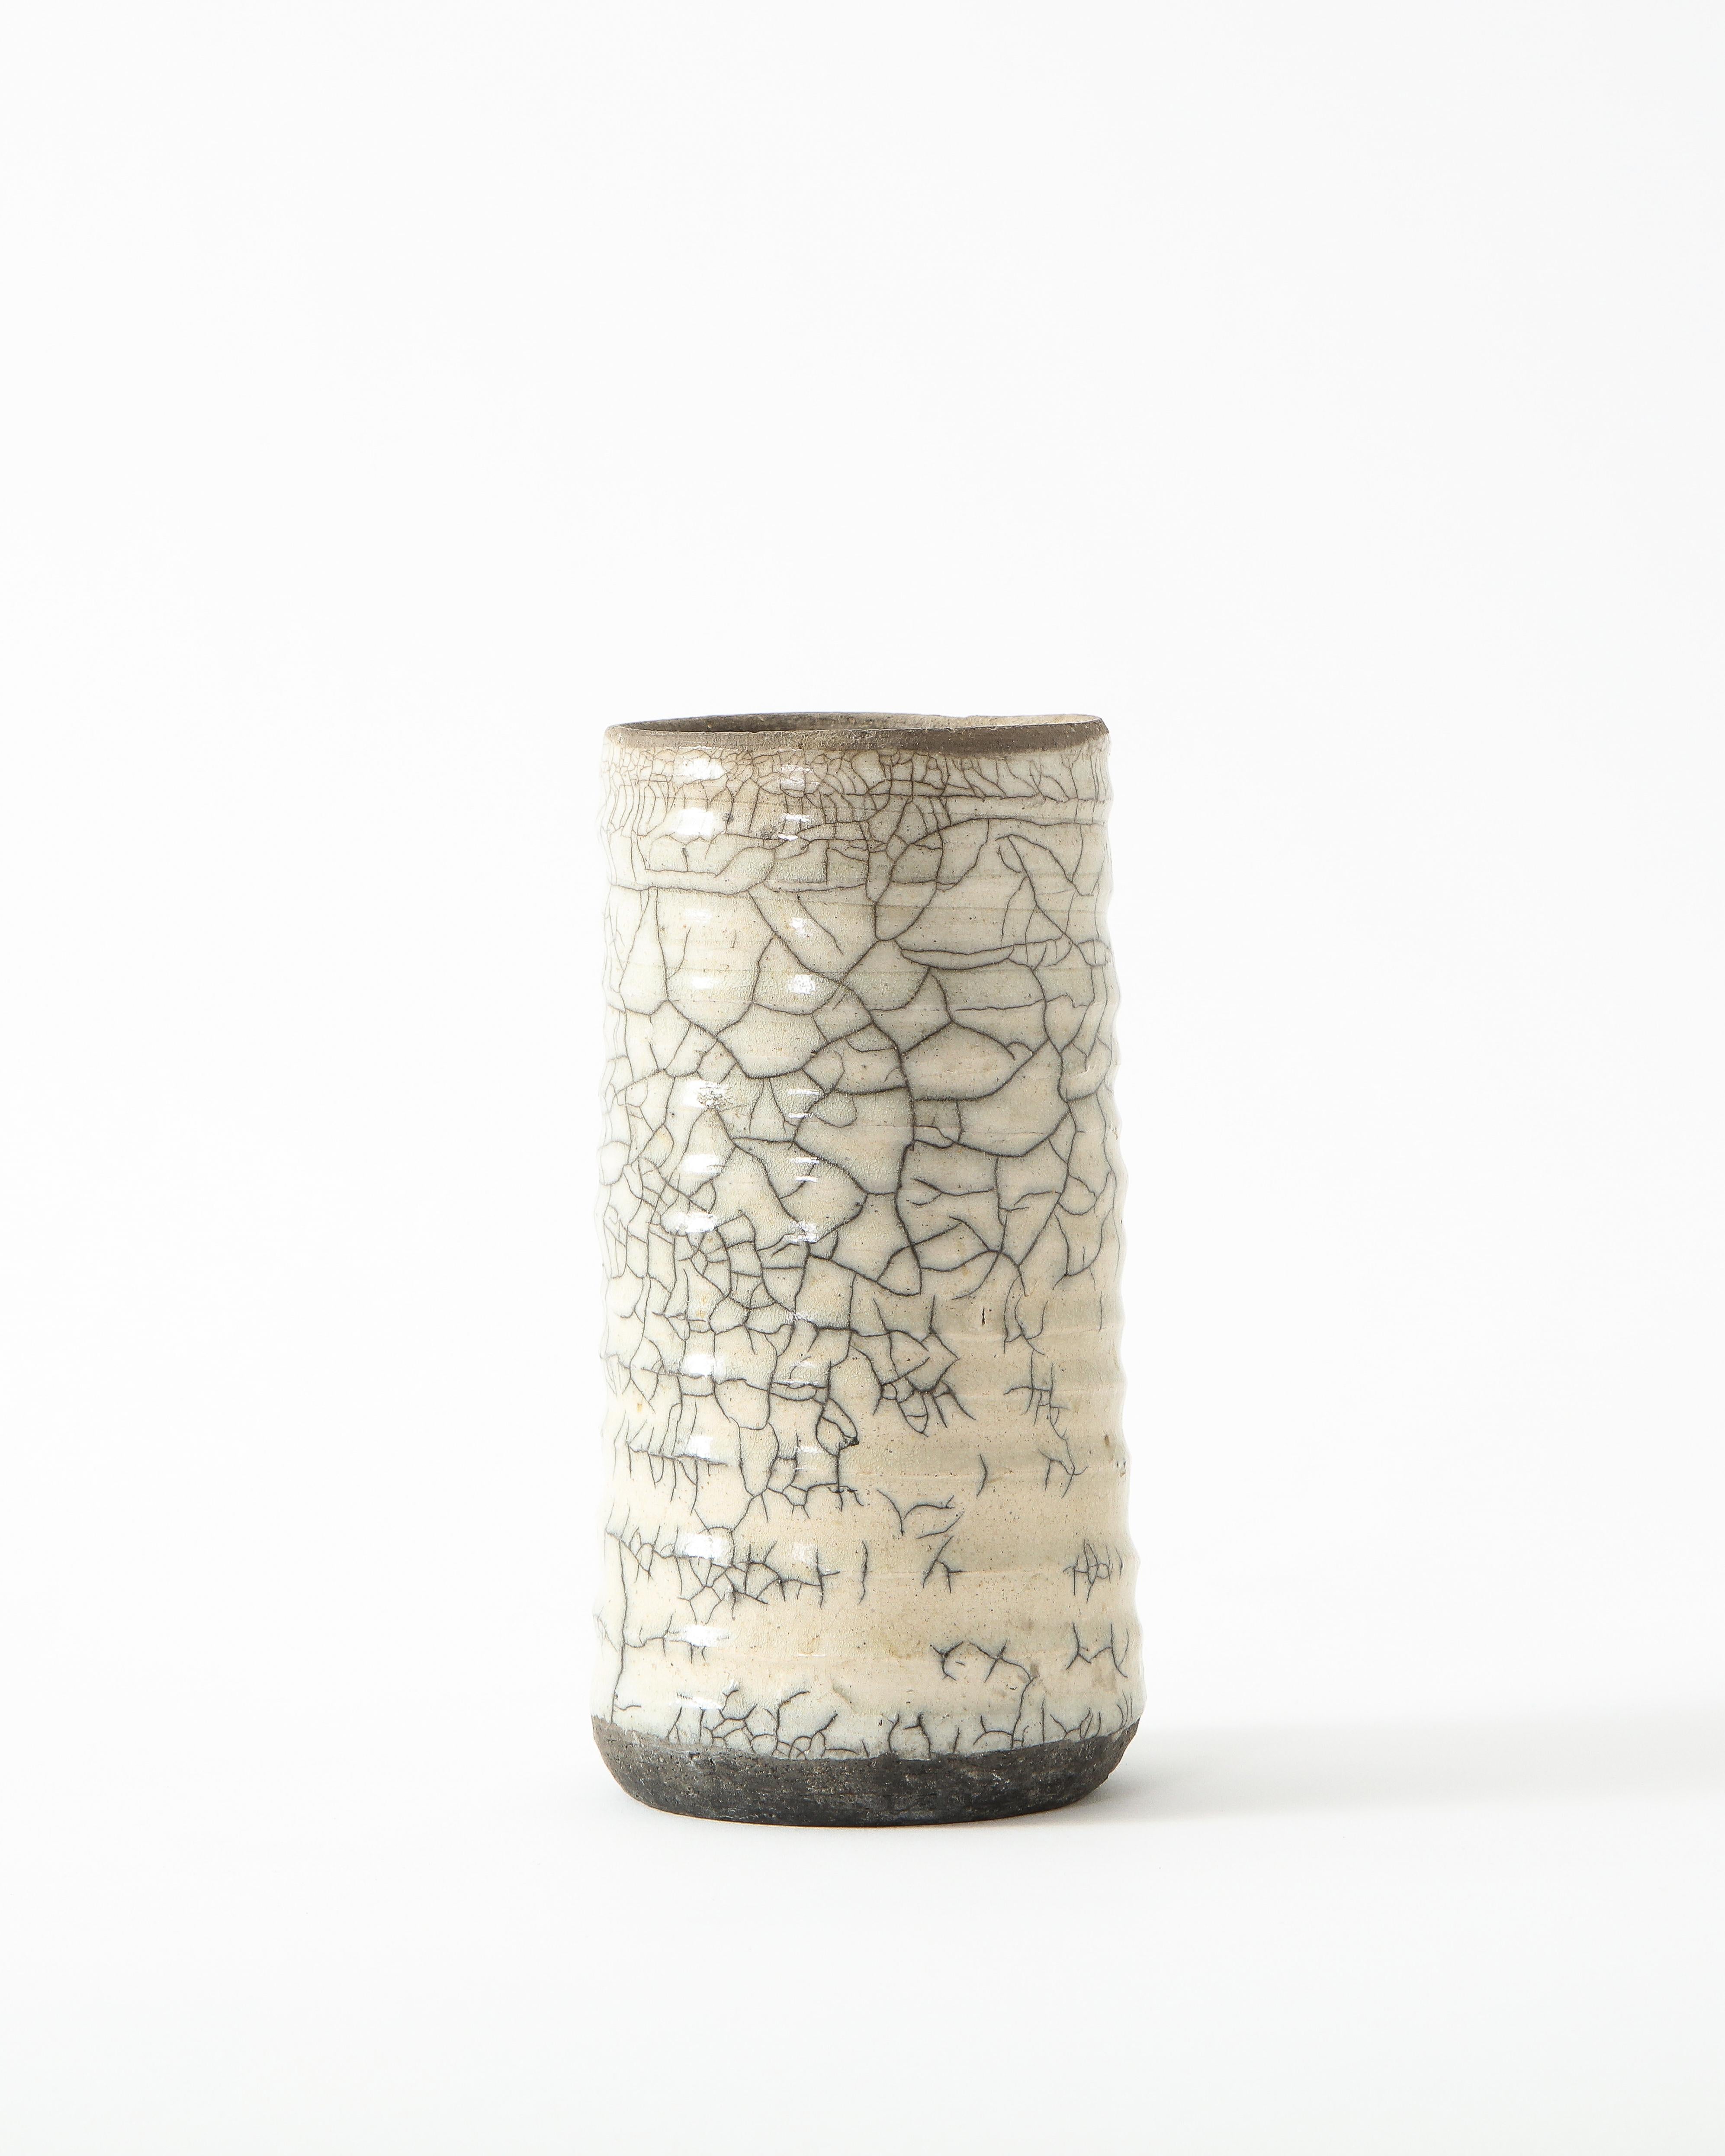 Small and narrow off-white ceramic vase with intricate crackling. Simple and poetic.